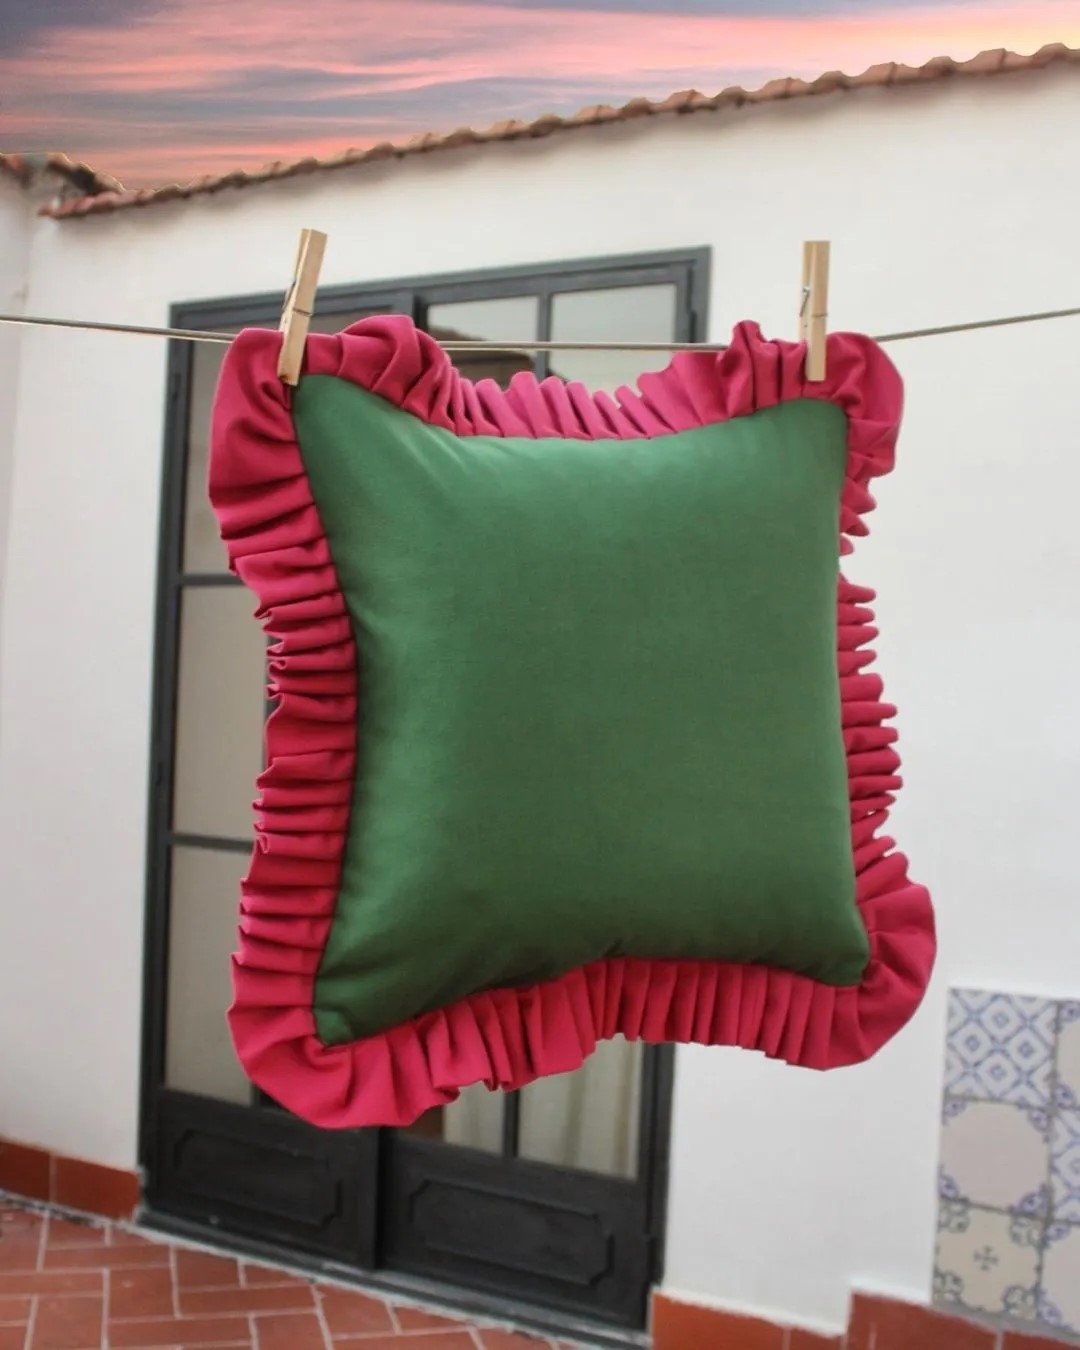 Red and green throw pillow by Paboy Bojang hangs on a clothes line.